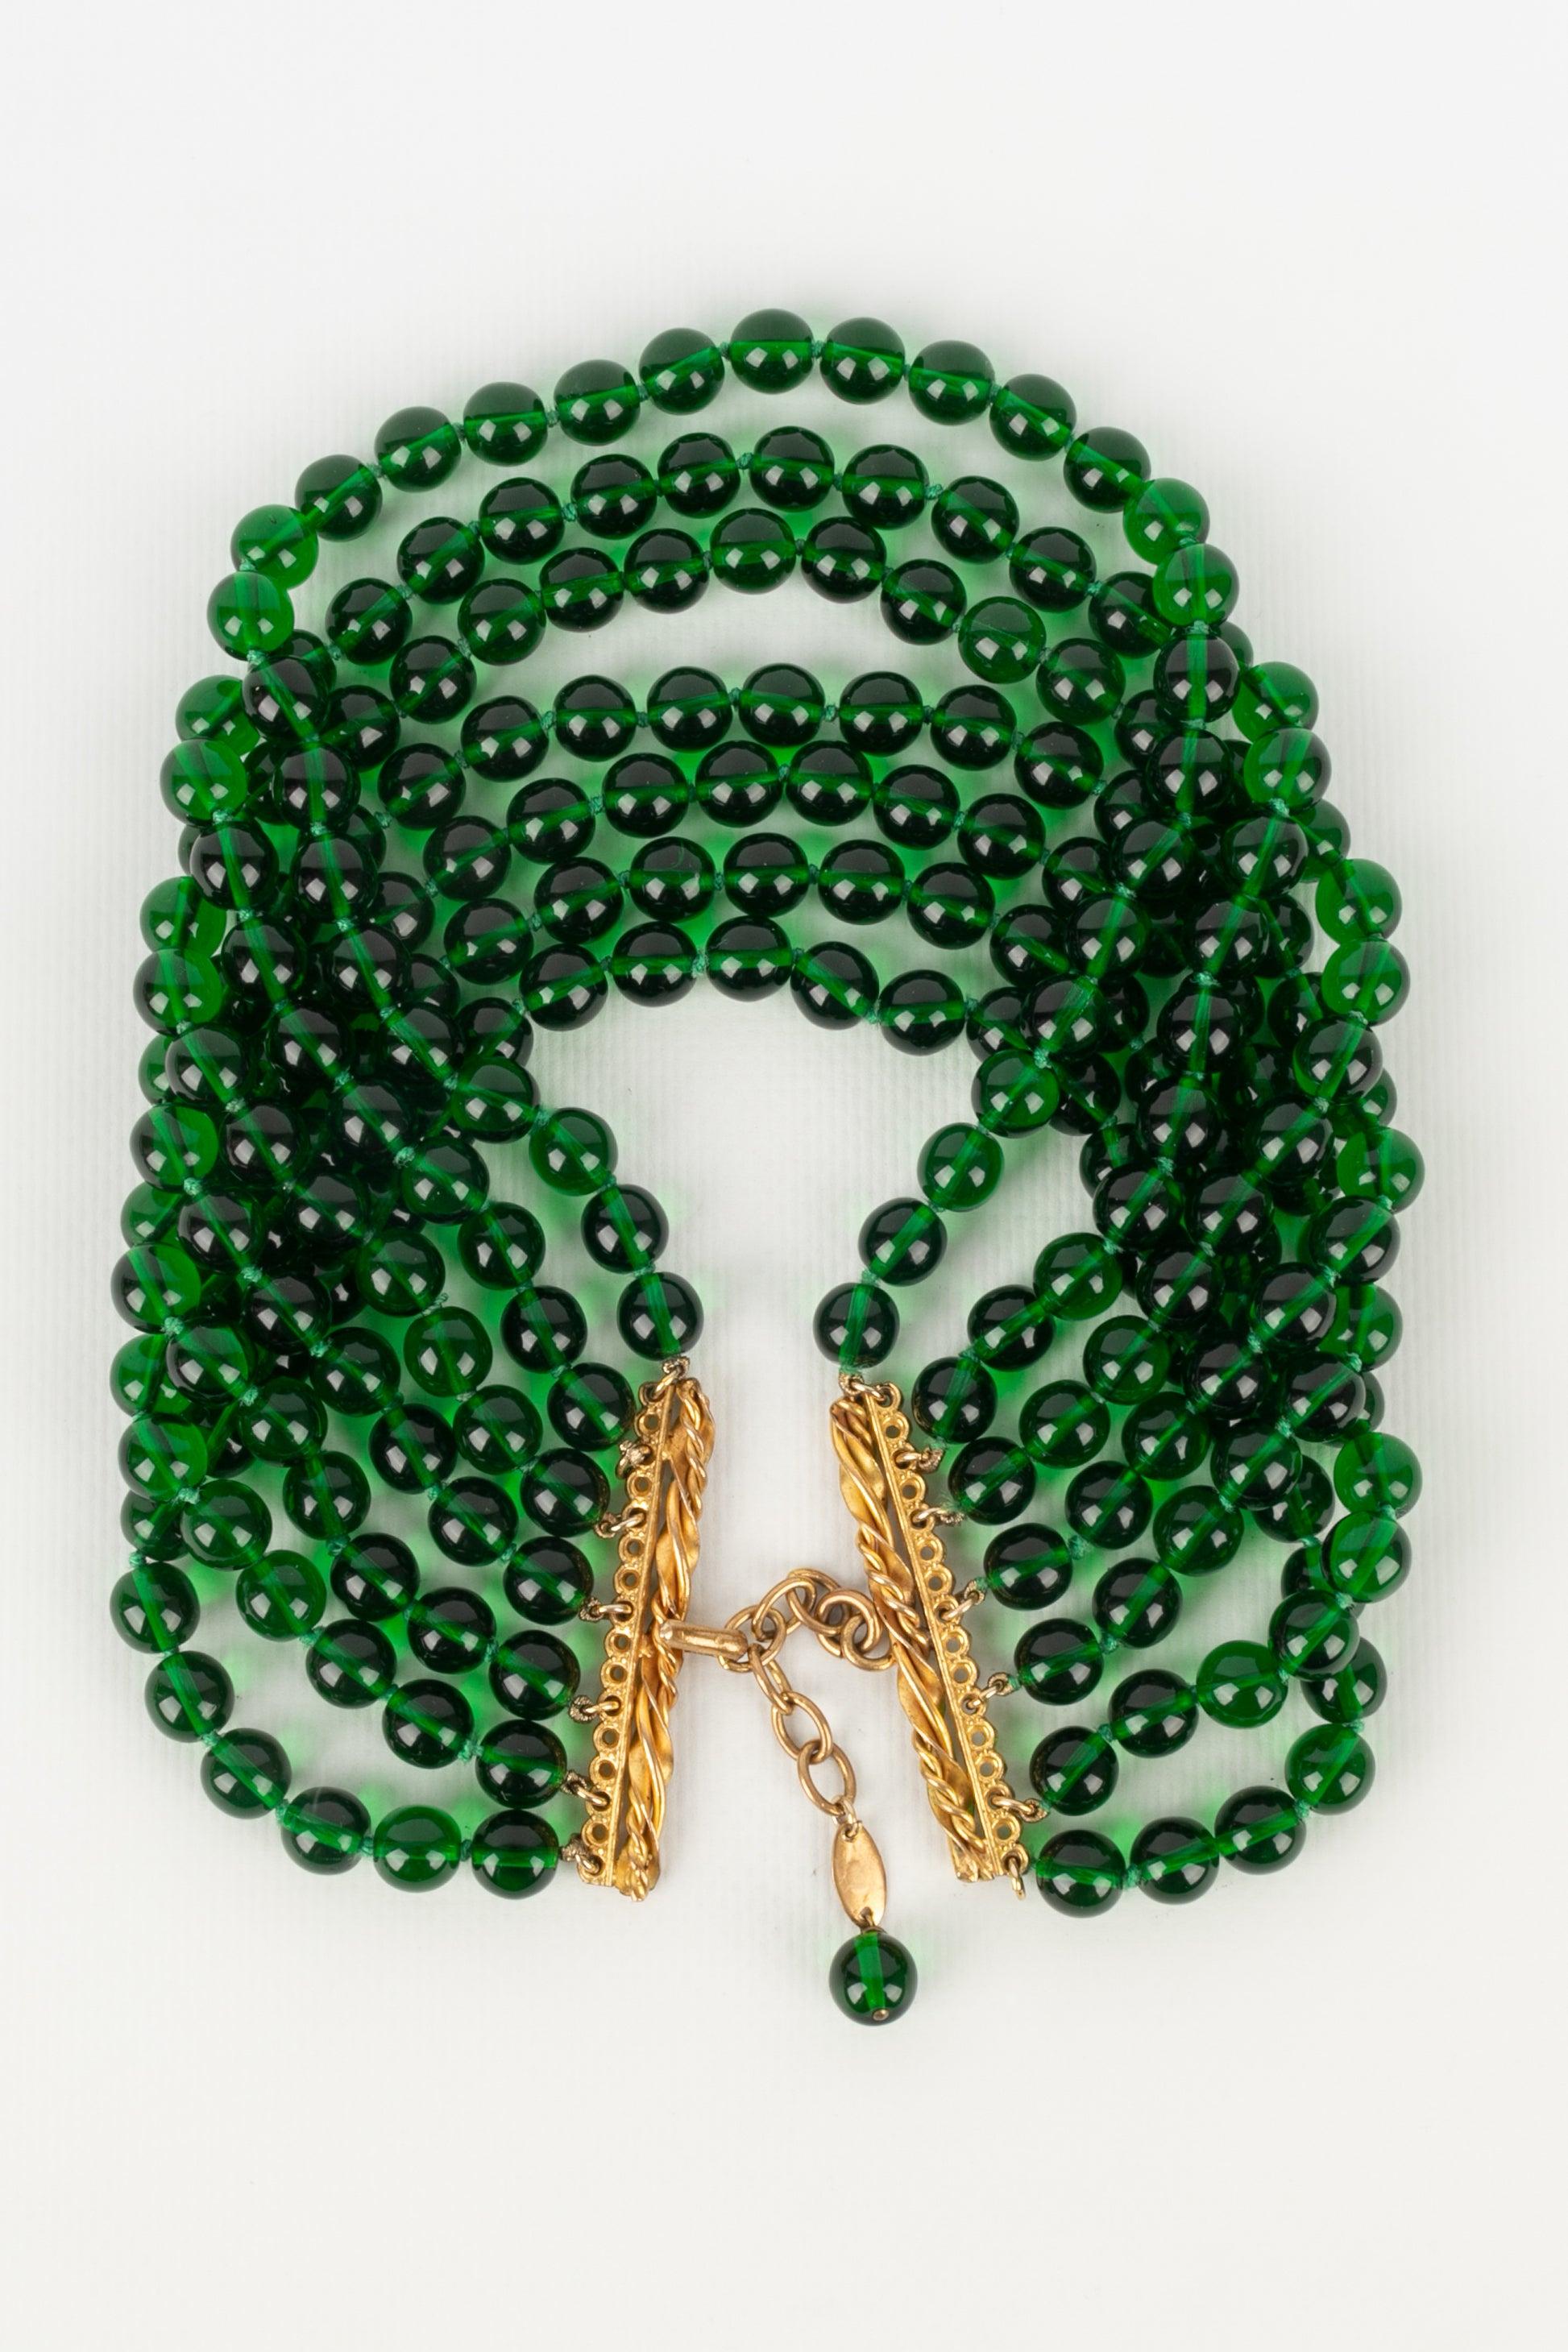 Chanel Short Necklace Made Up of Several Rows of Green Glass Beads, 1980s For Sale 2